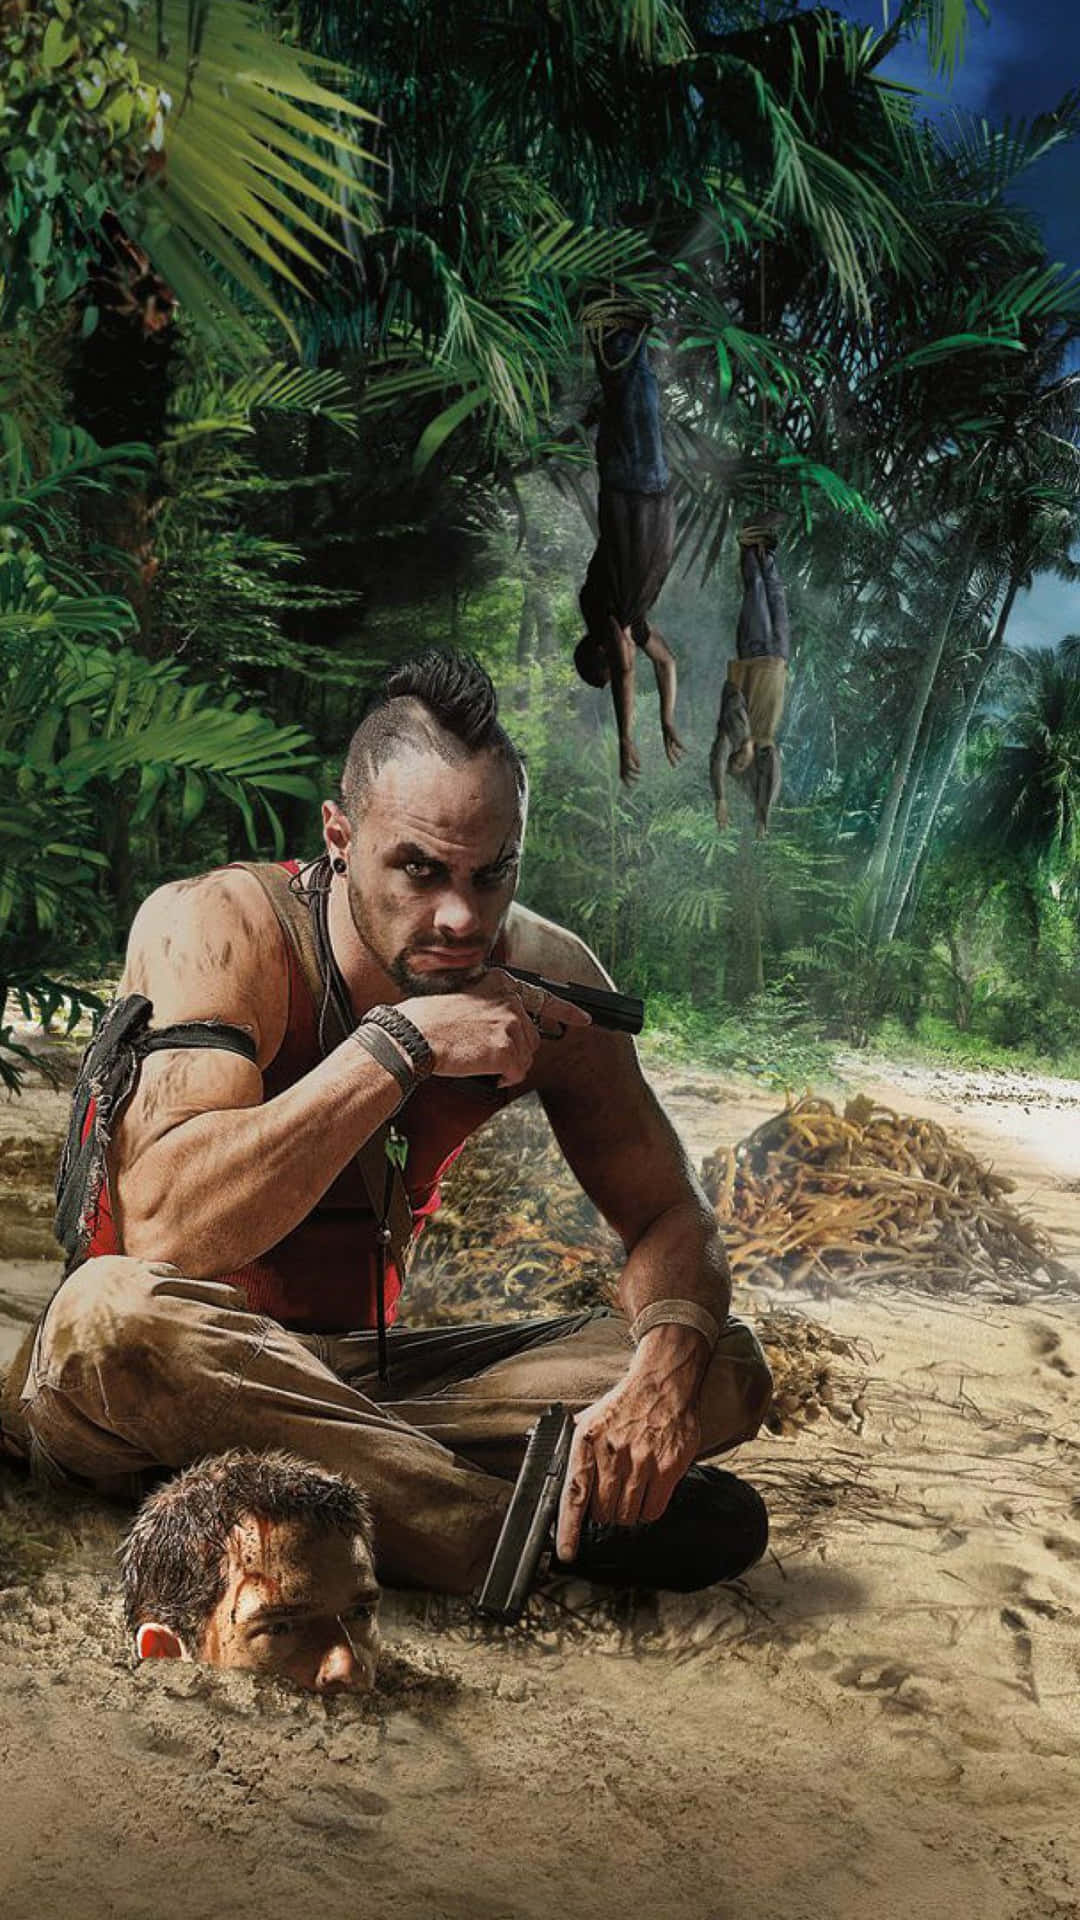 Oplev Unreal Gaming på din iPhone Xs med Far Cry 3 HD Tapet.